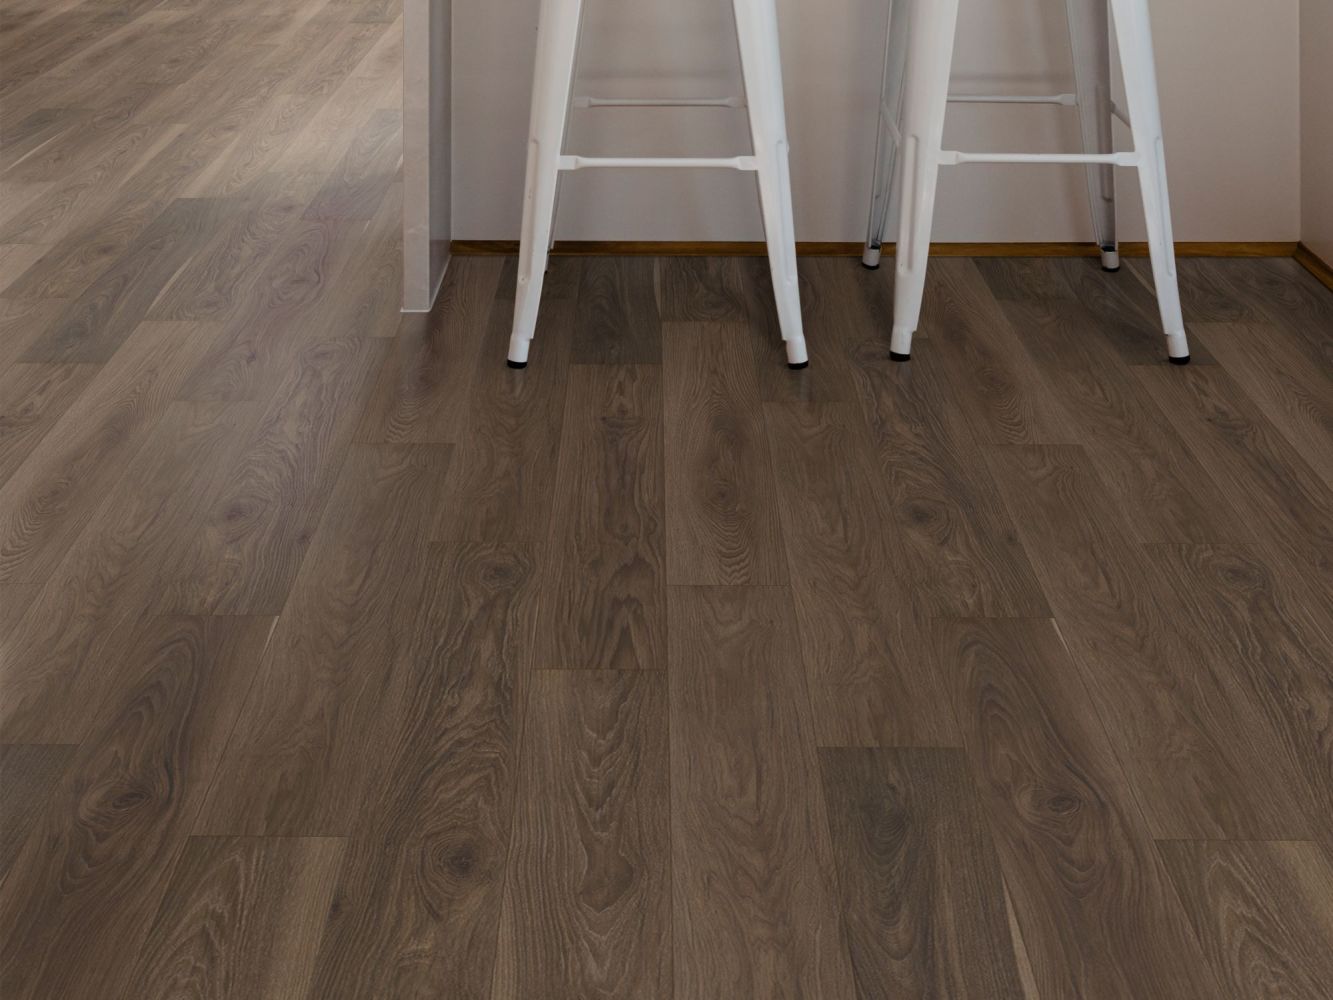 Shaw Floors Resilient Property Solutions Supino Hd+natural Bevel Charred Earth 07232_VE441